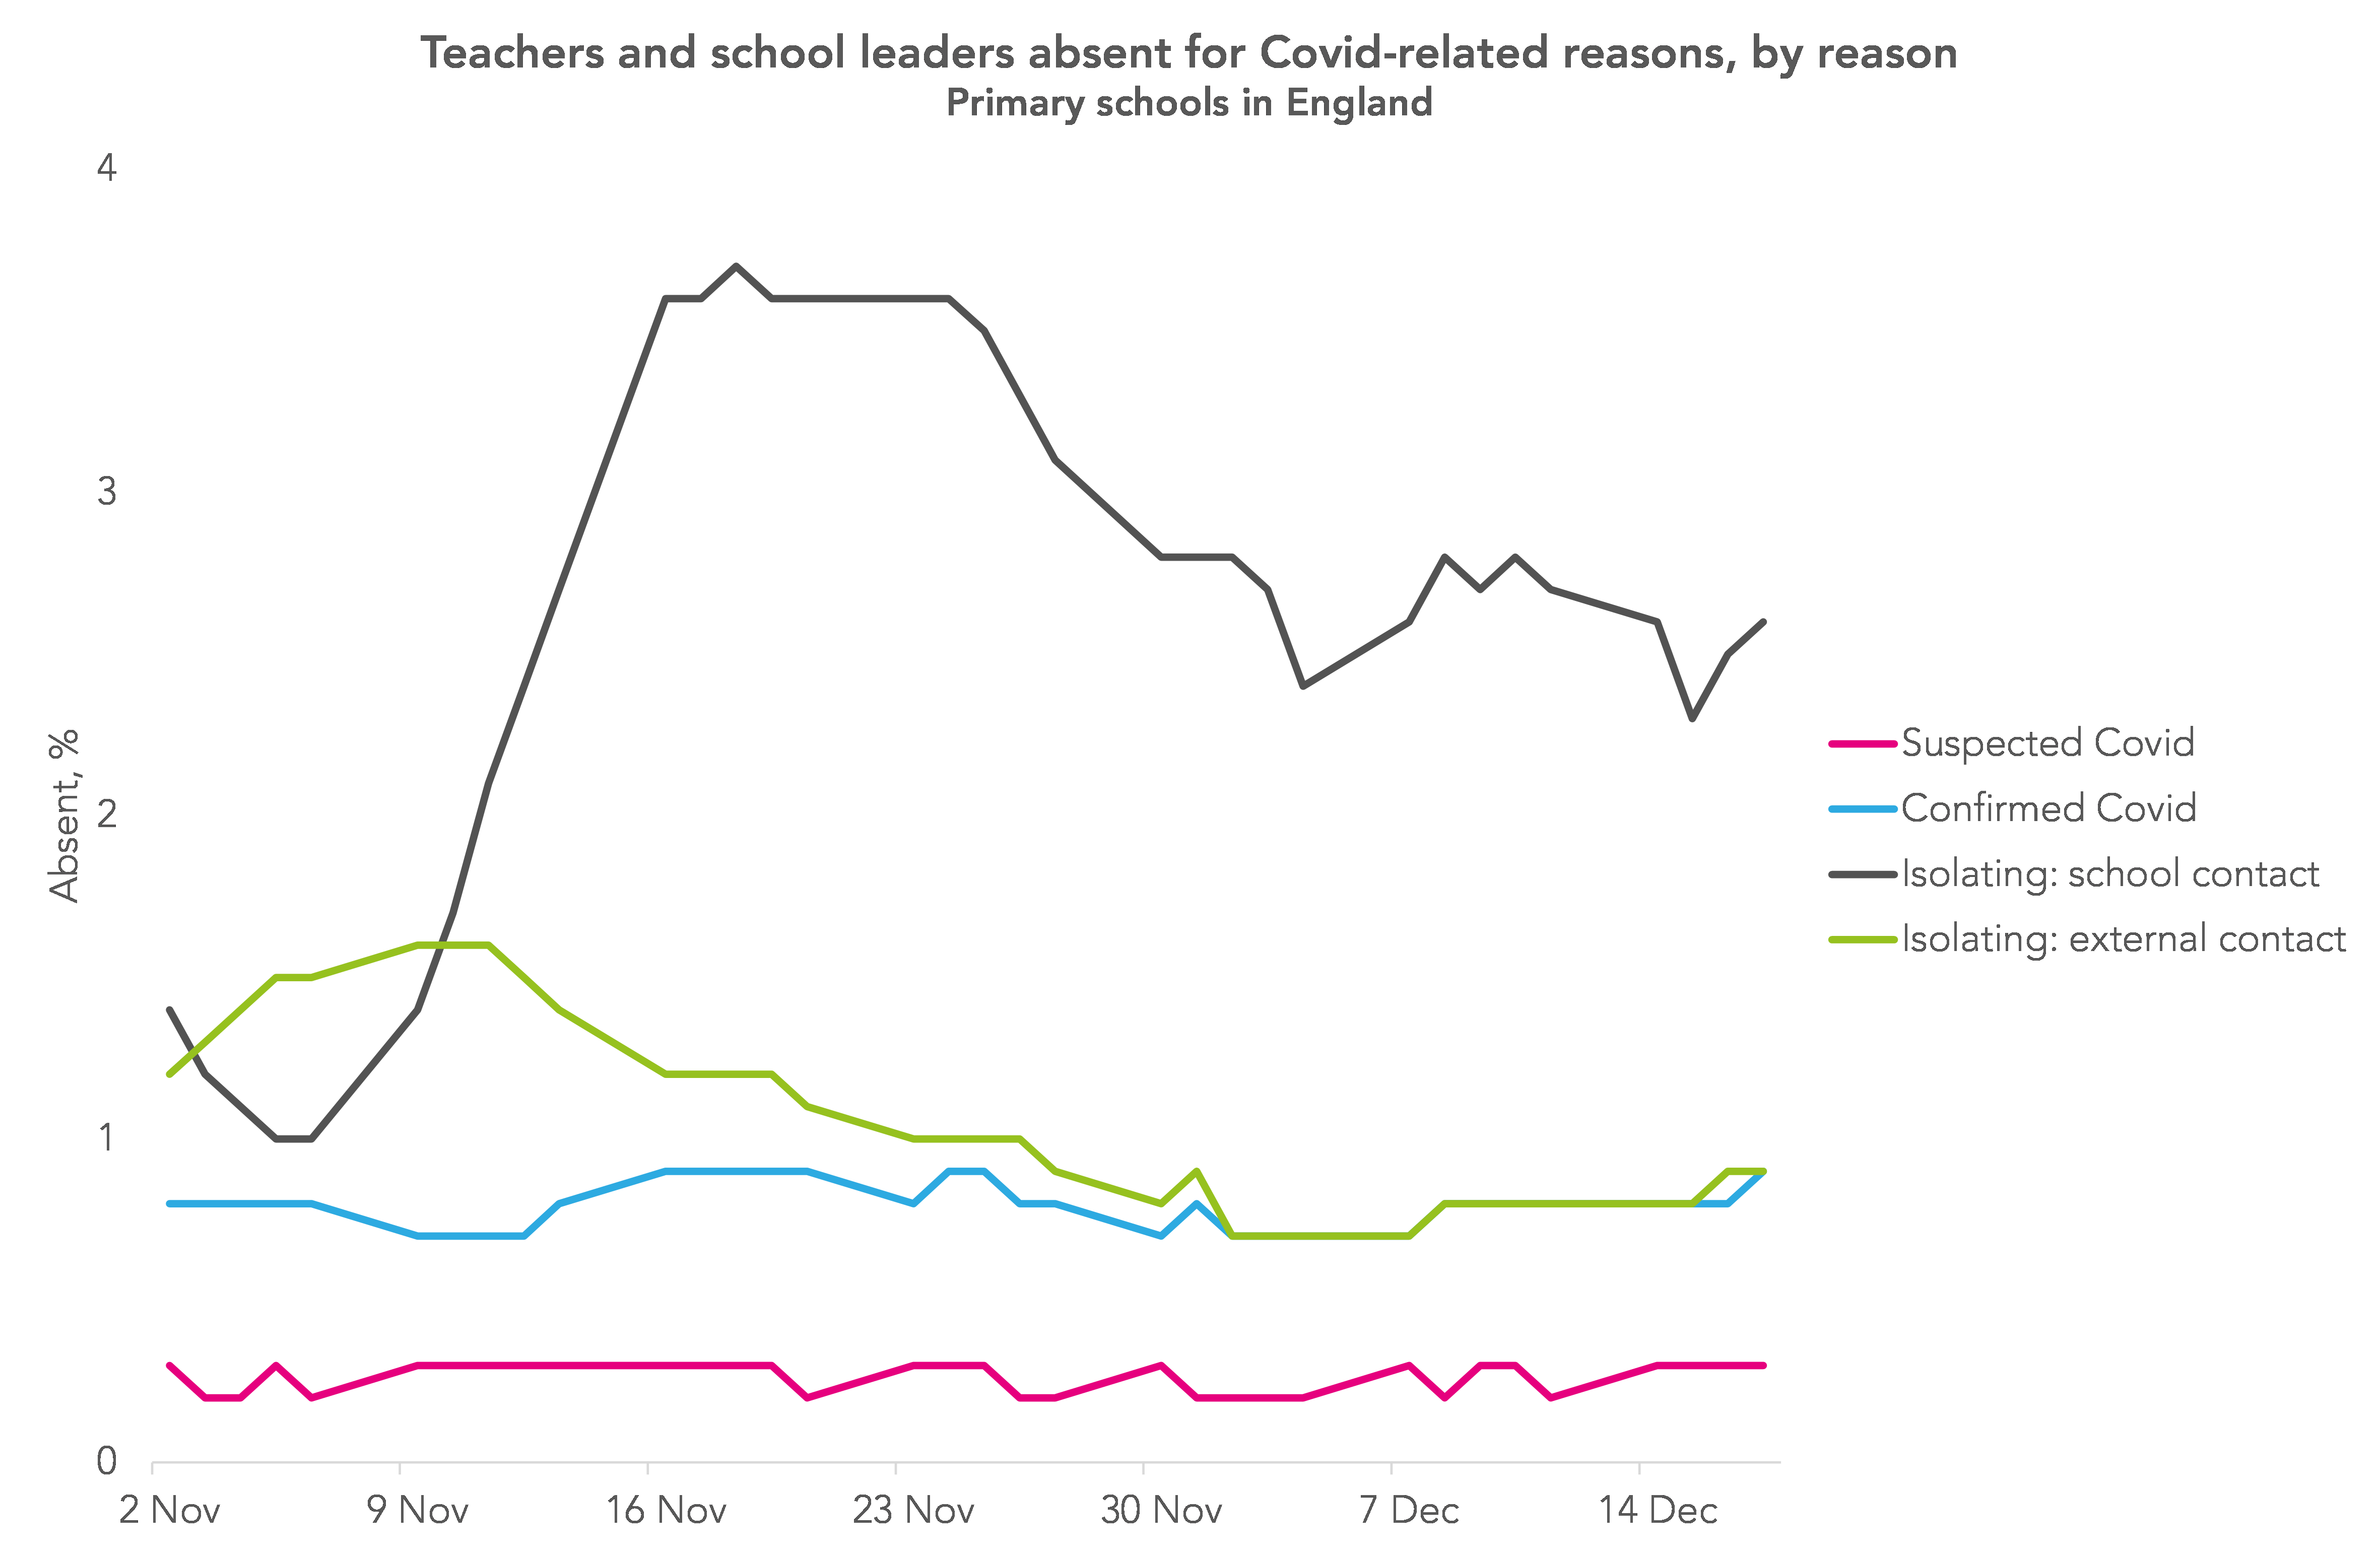 Graph showing primary teacher absence rates